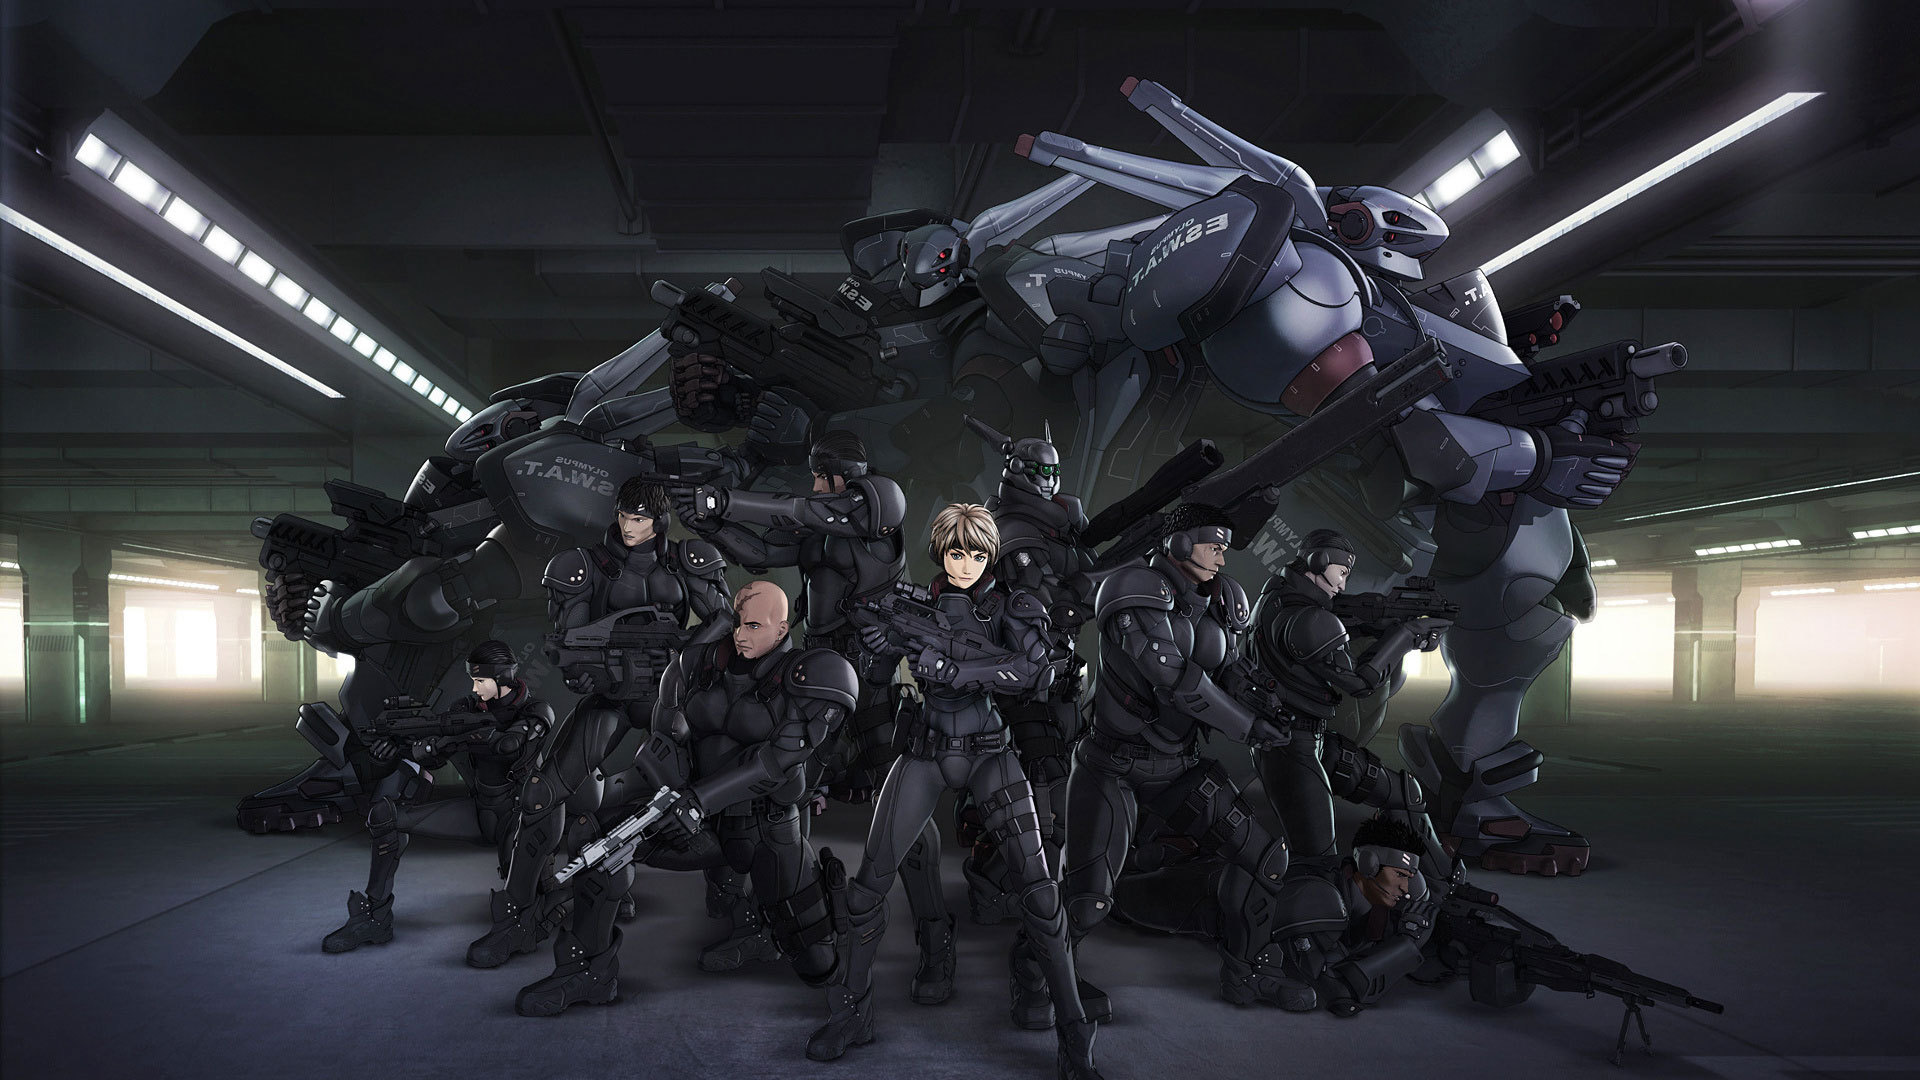 Appleseed Backgrounds, Compatible - PC, Mobile, Gadgets| 1920x1080 px